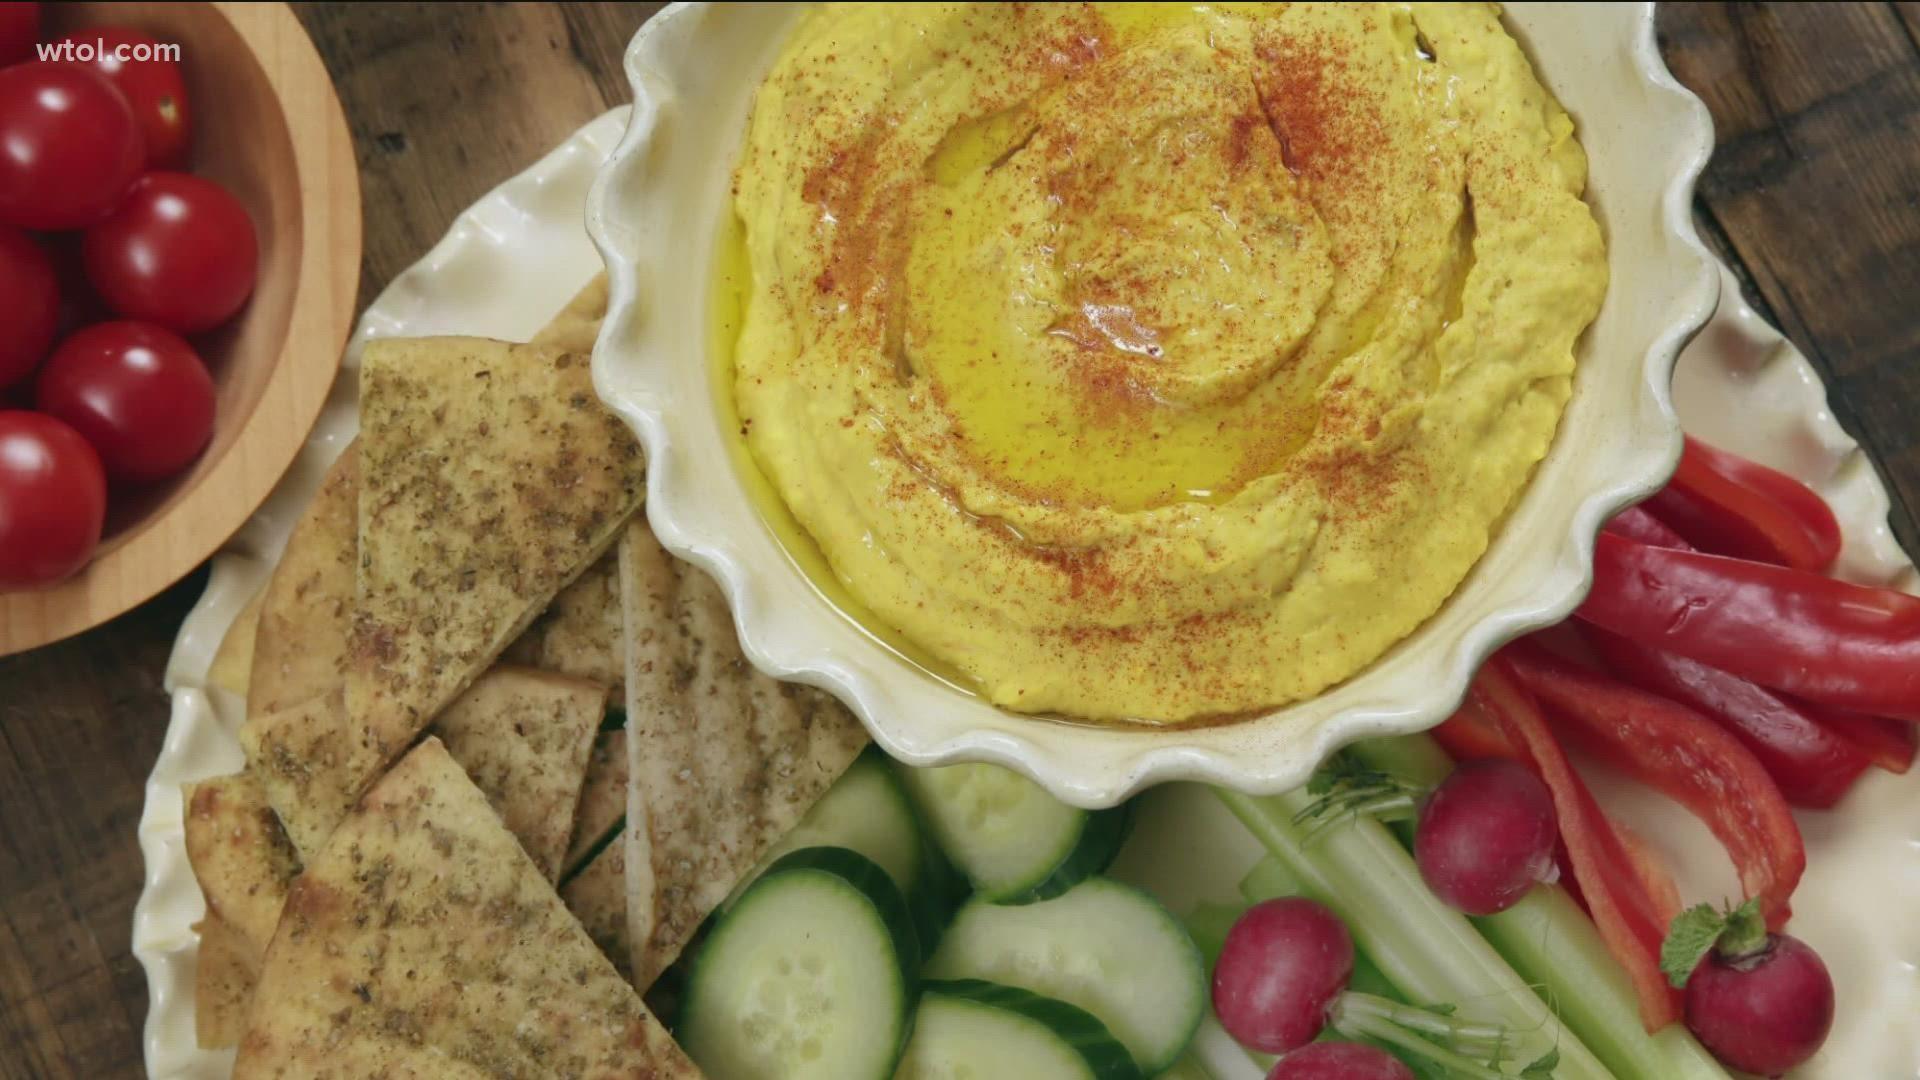 The Middle Eastern dish, hummus, has become a favorite among Americans. Yet, the tasty spread's origin has caused significant conflicts.